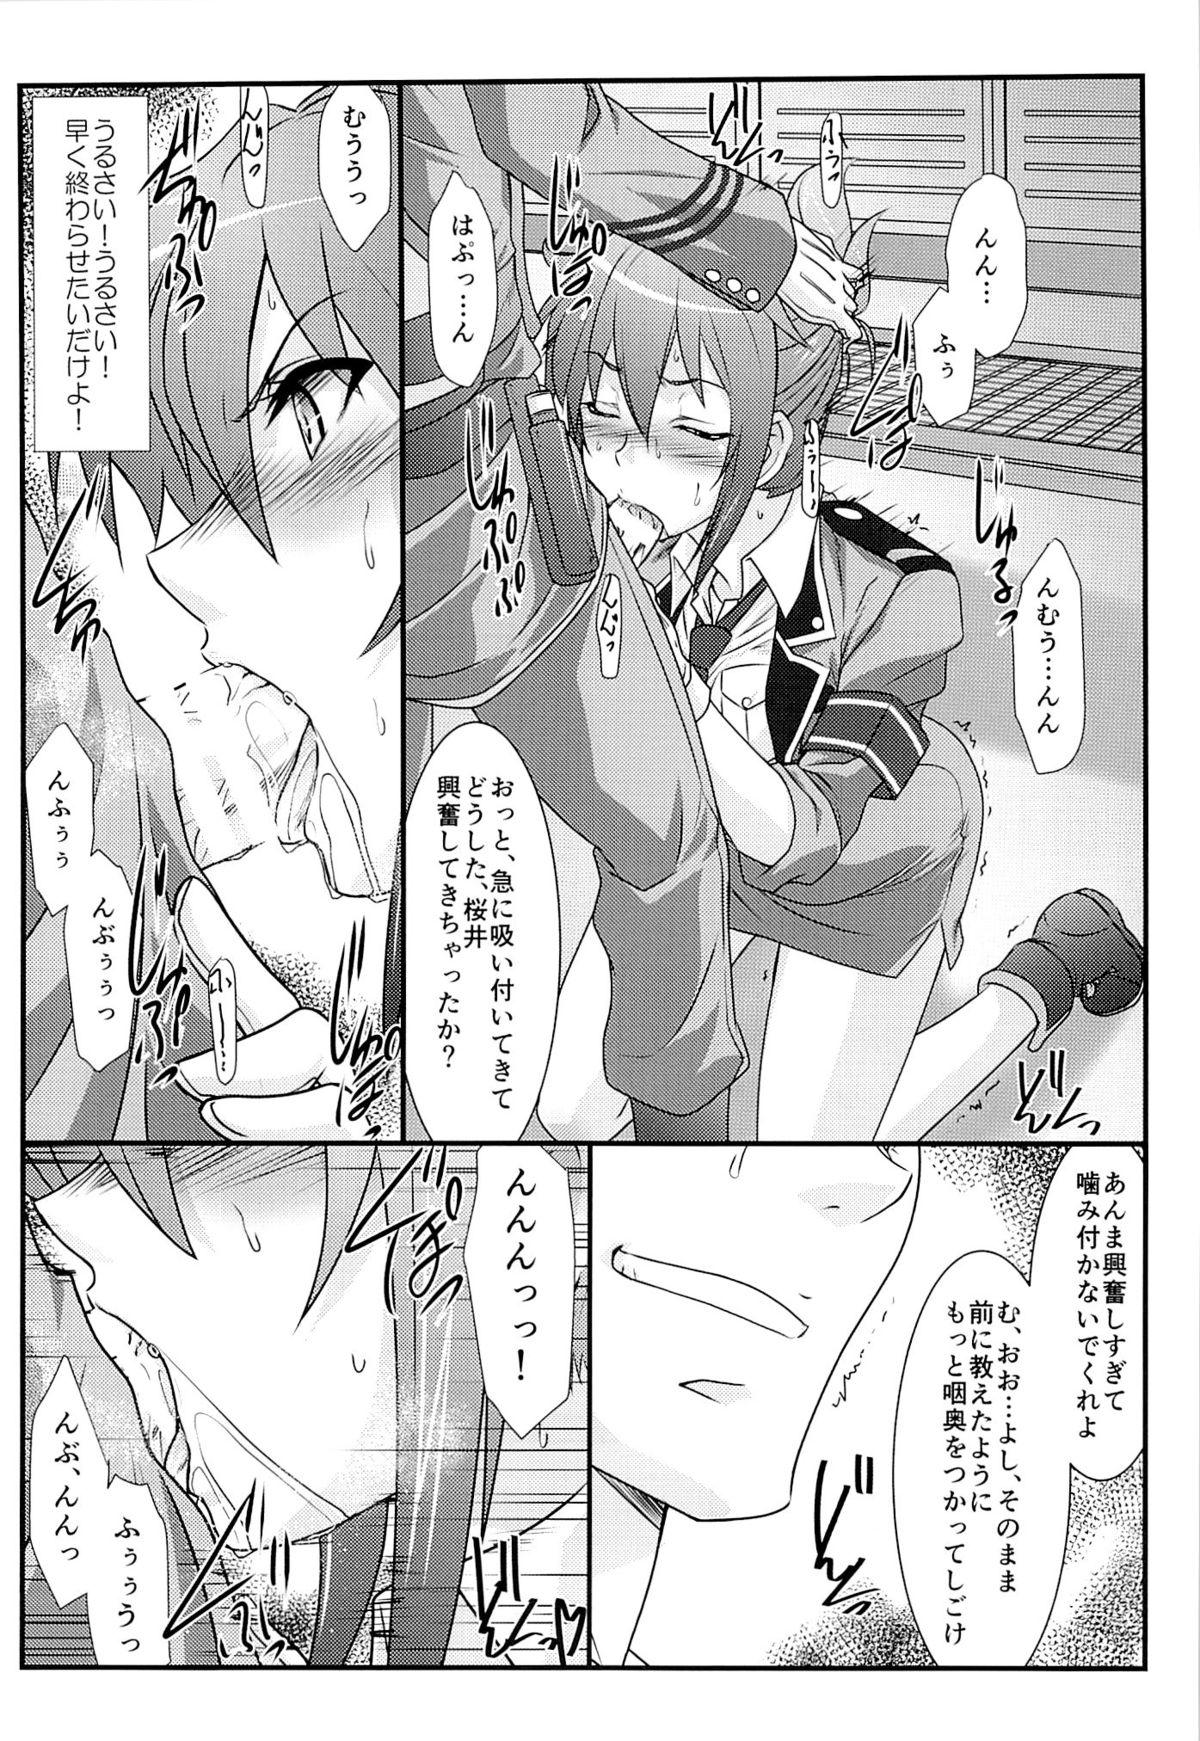 Nerd Astral Bout Ver.30 - Rail wars Mouth - Page 5